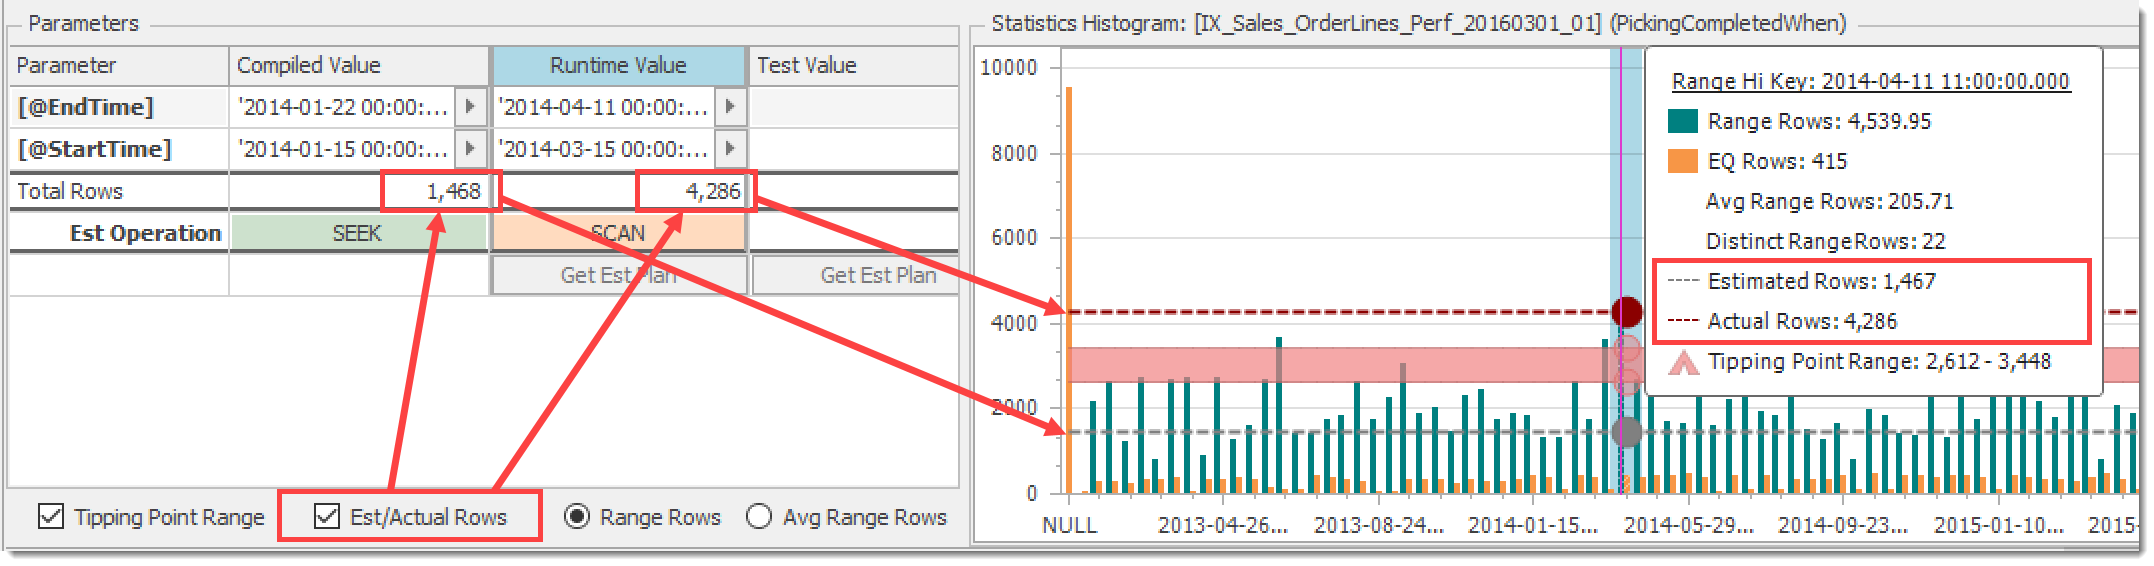 Toggle for Estimated and Actual Rows on the histogram chart